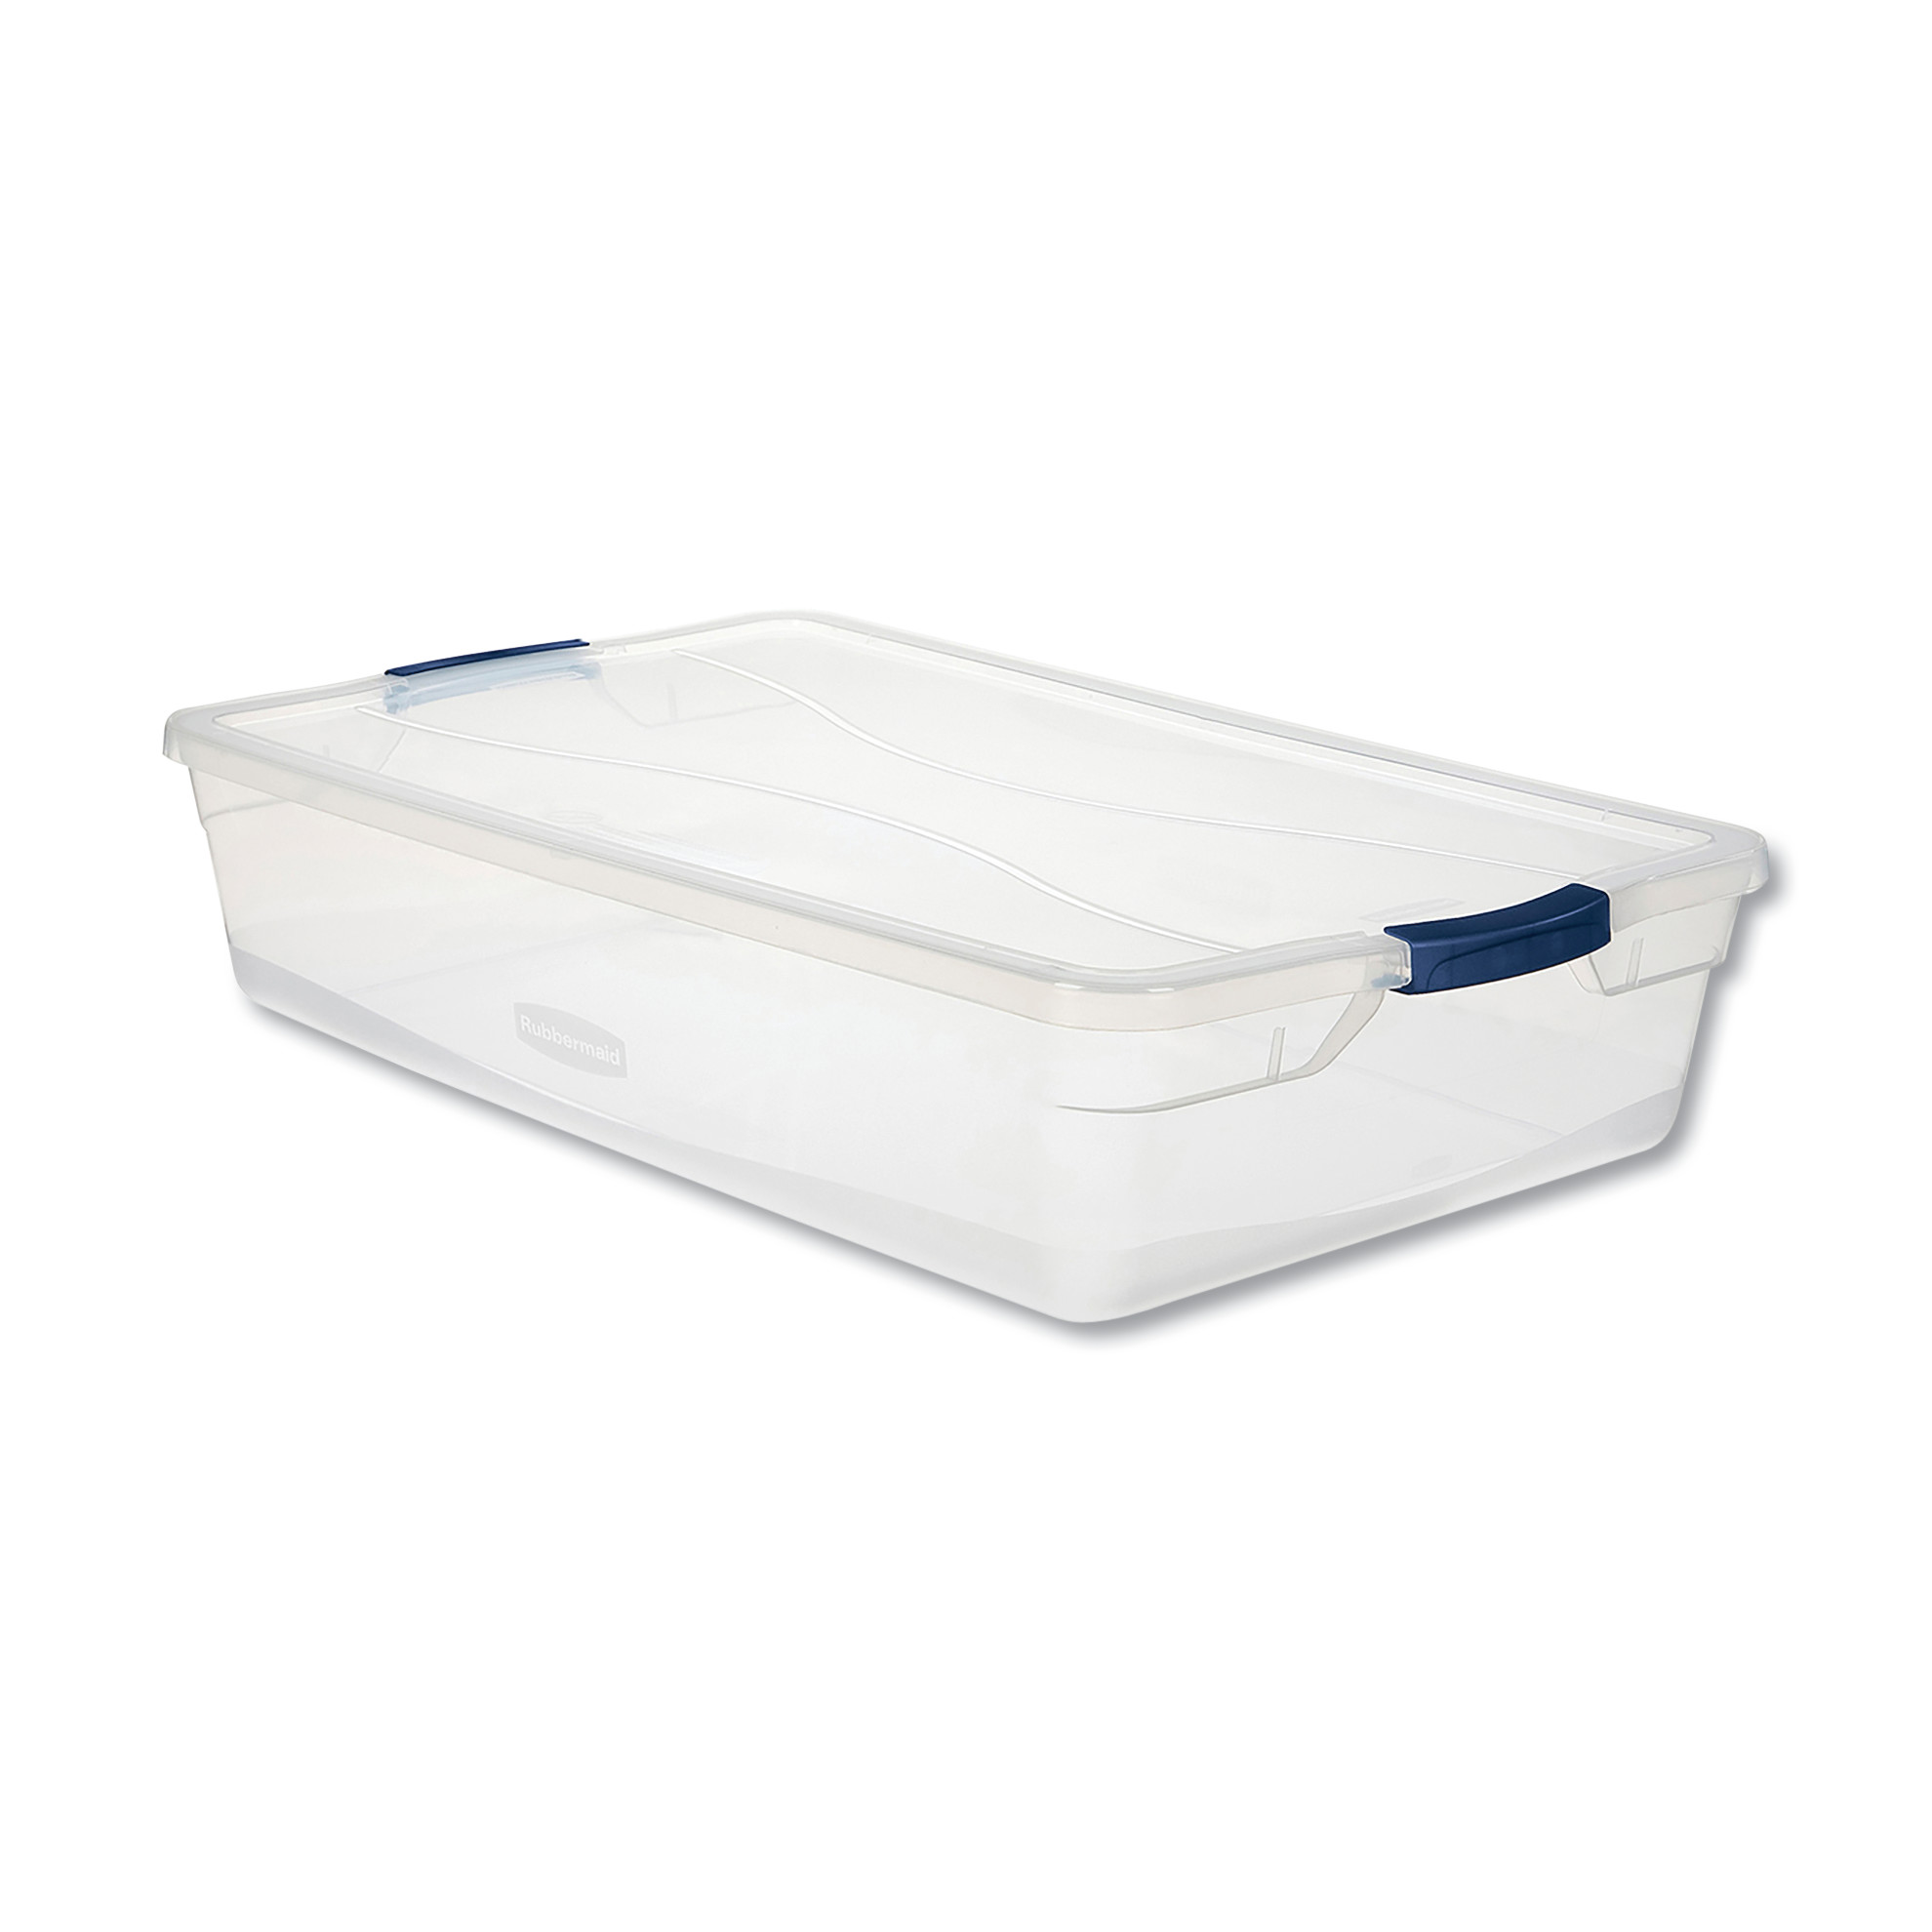 Clever Store Basic Latch-Lid Container, 17 3/4w x 29d x 6 1/8h, 41qt, Clear